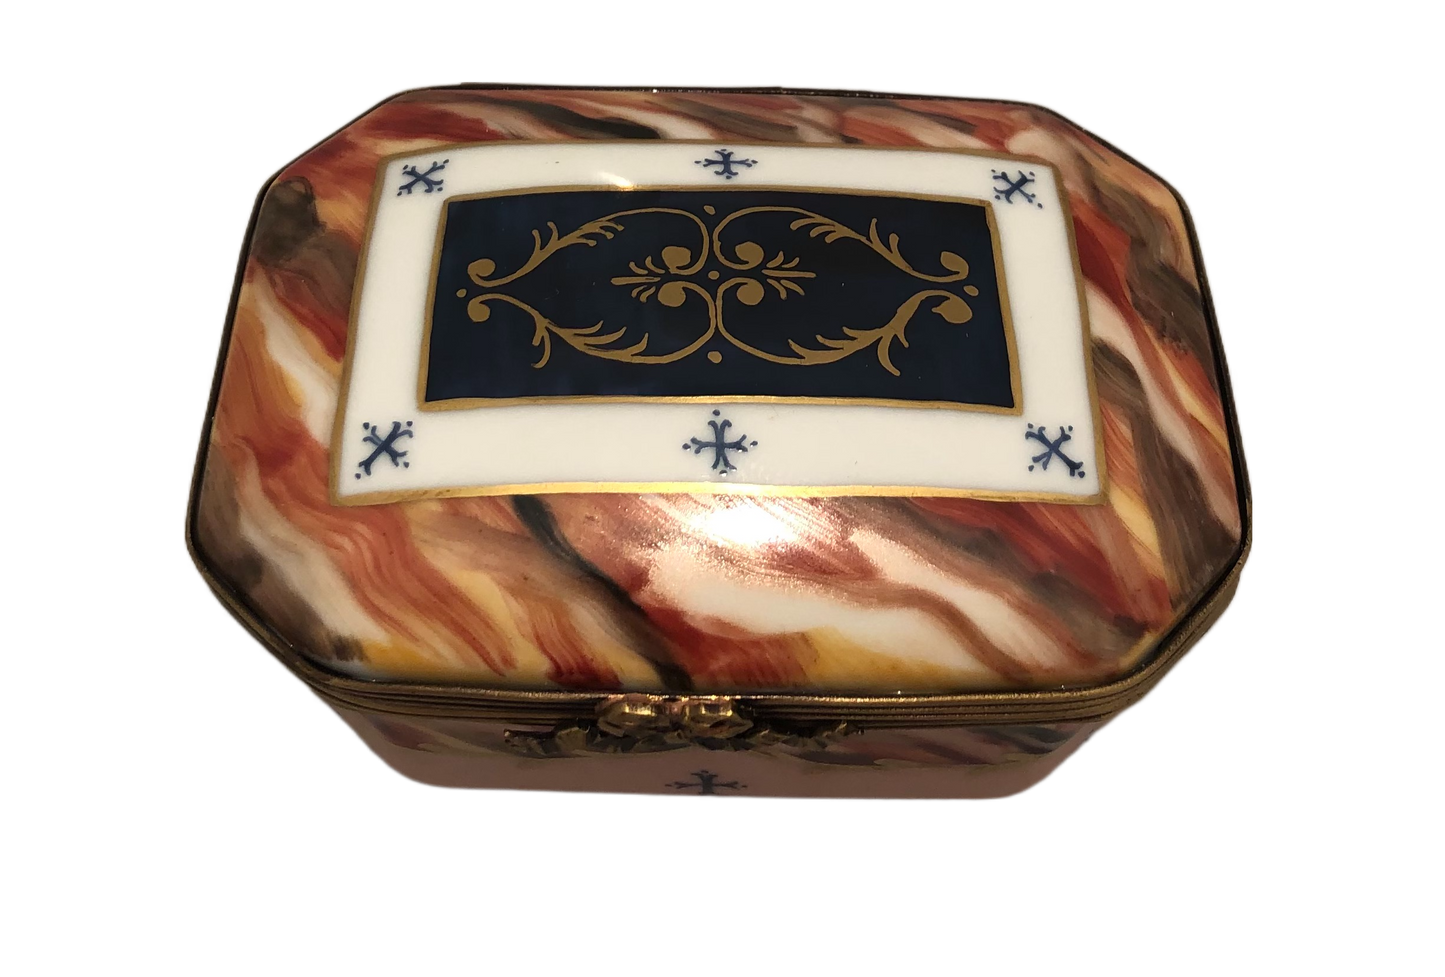 Enchanting Sky: Hand-Painted Limoges Box with Captivating Colors